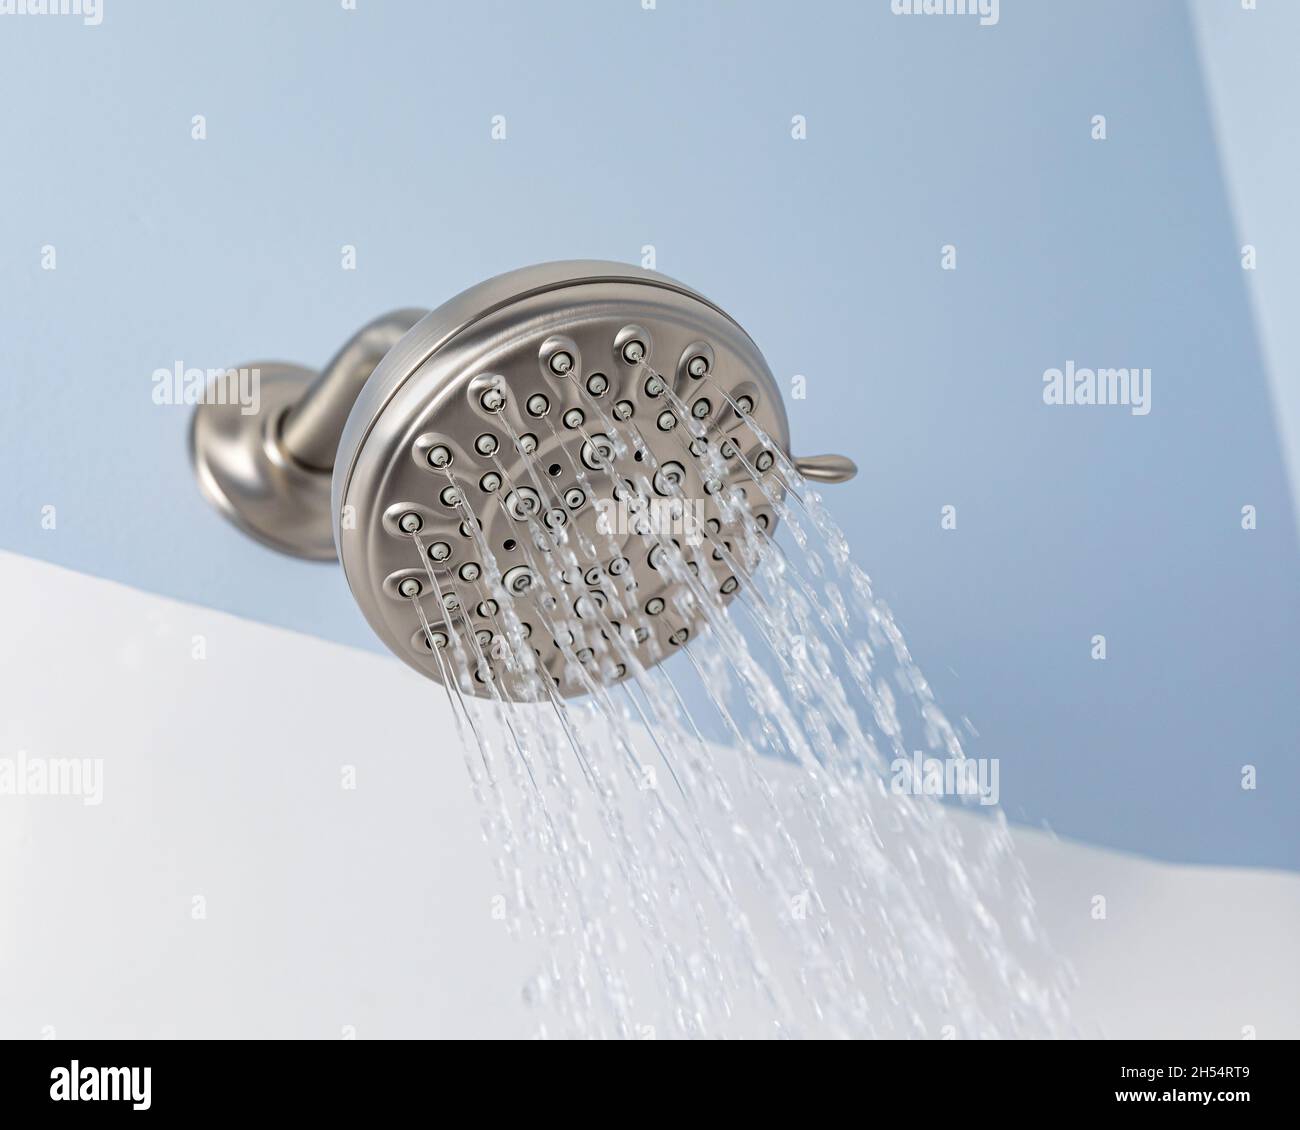 Motion blur of water flowing from shower head in bathroom. Showering, clean water, home maintenance and repair Stock Photo